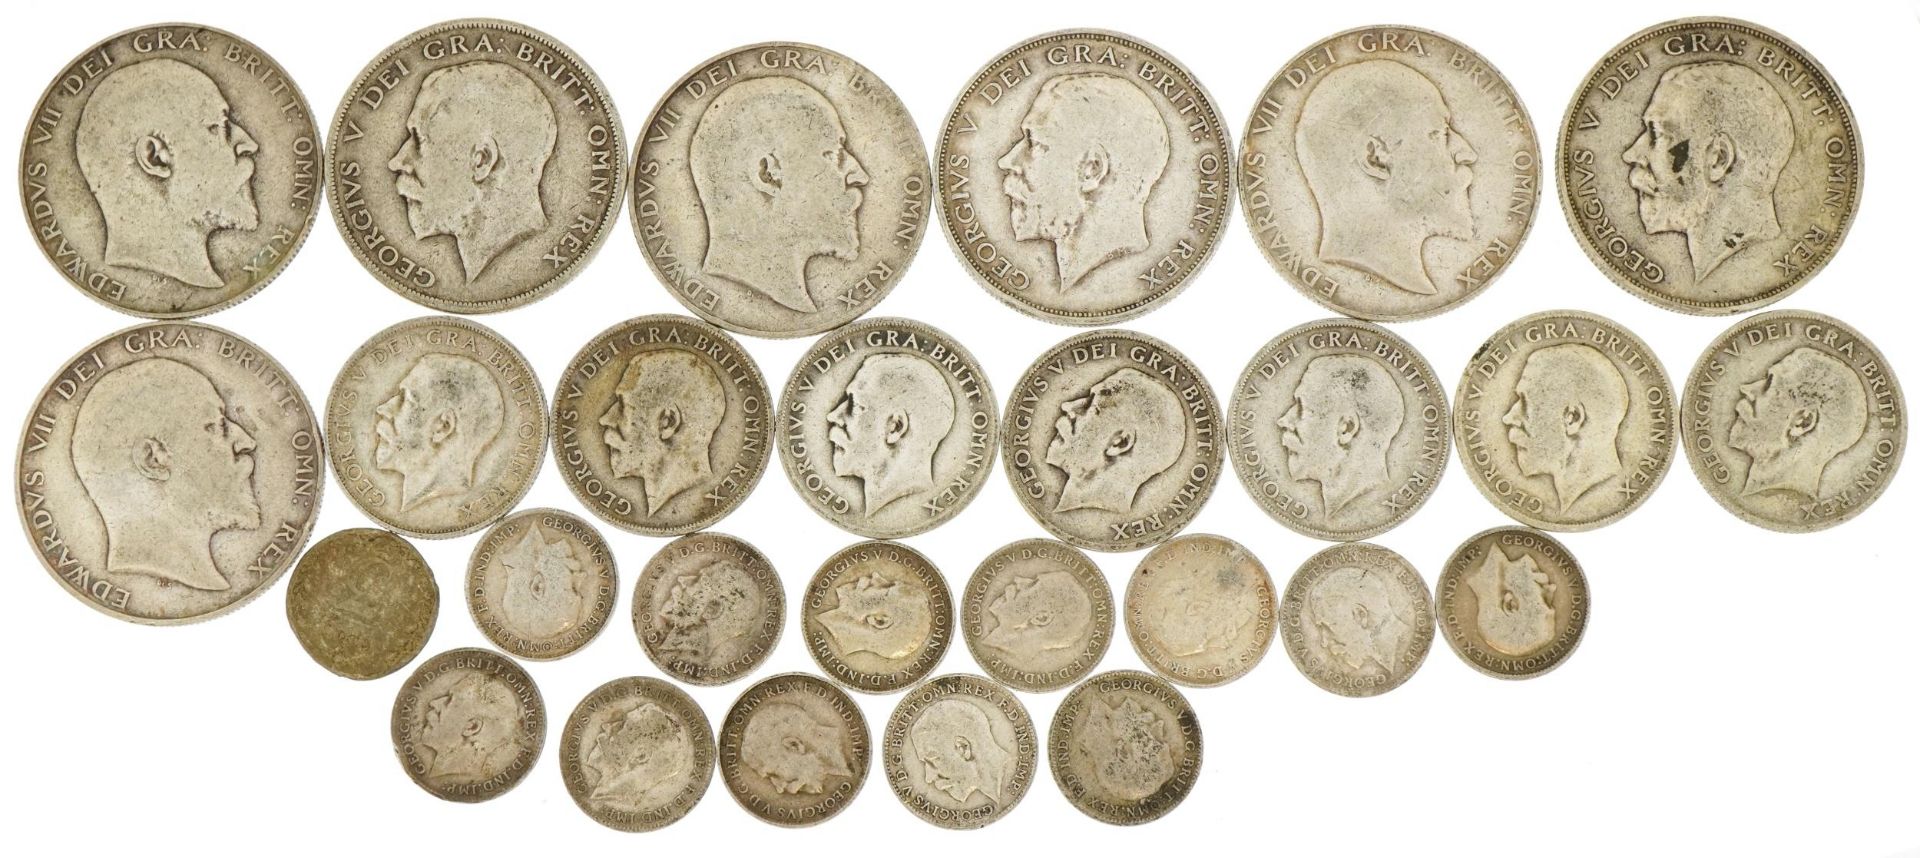 British pre decimal pre 1947 coinage including half crowns and shillings, 148.0g For further